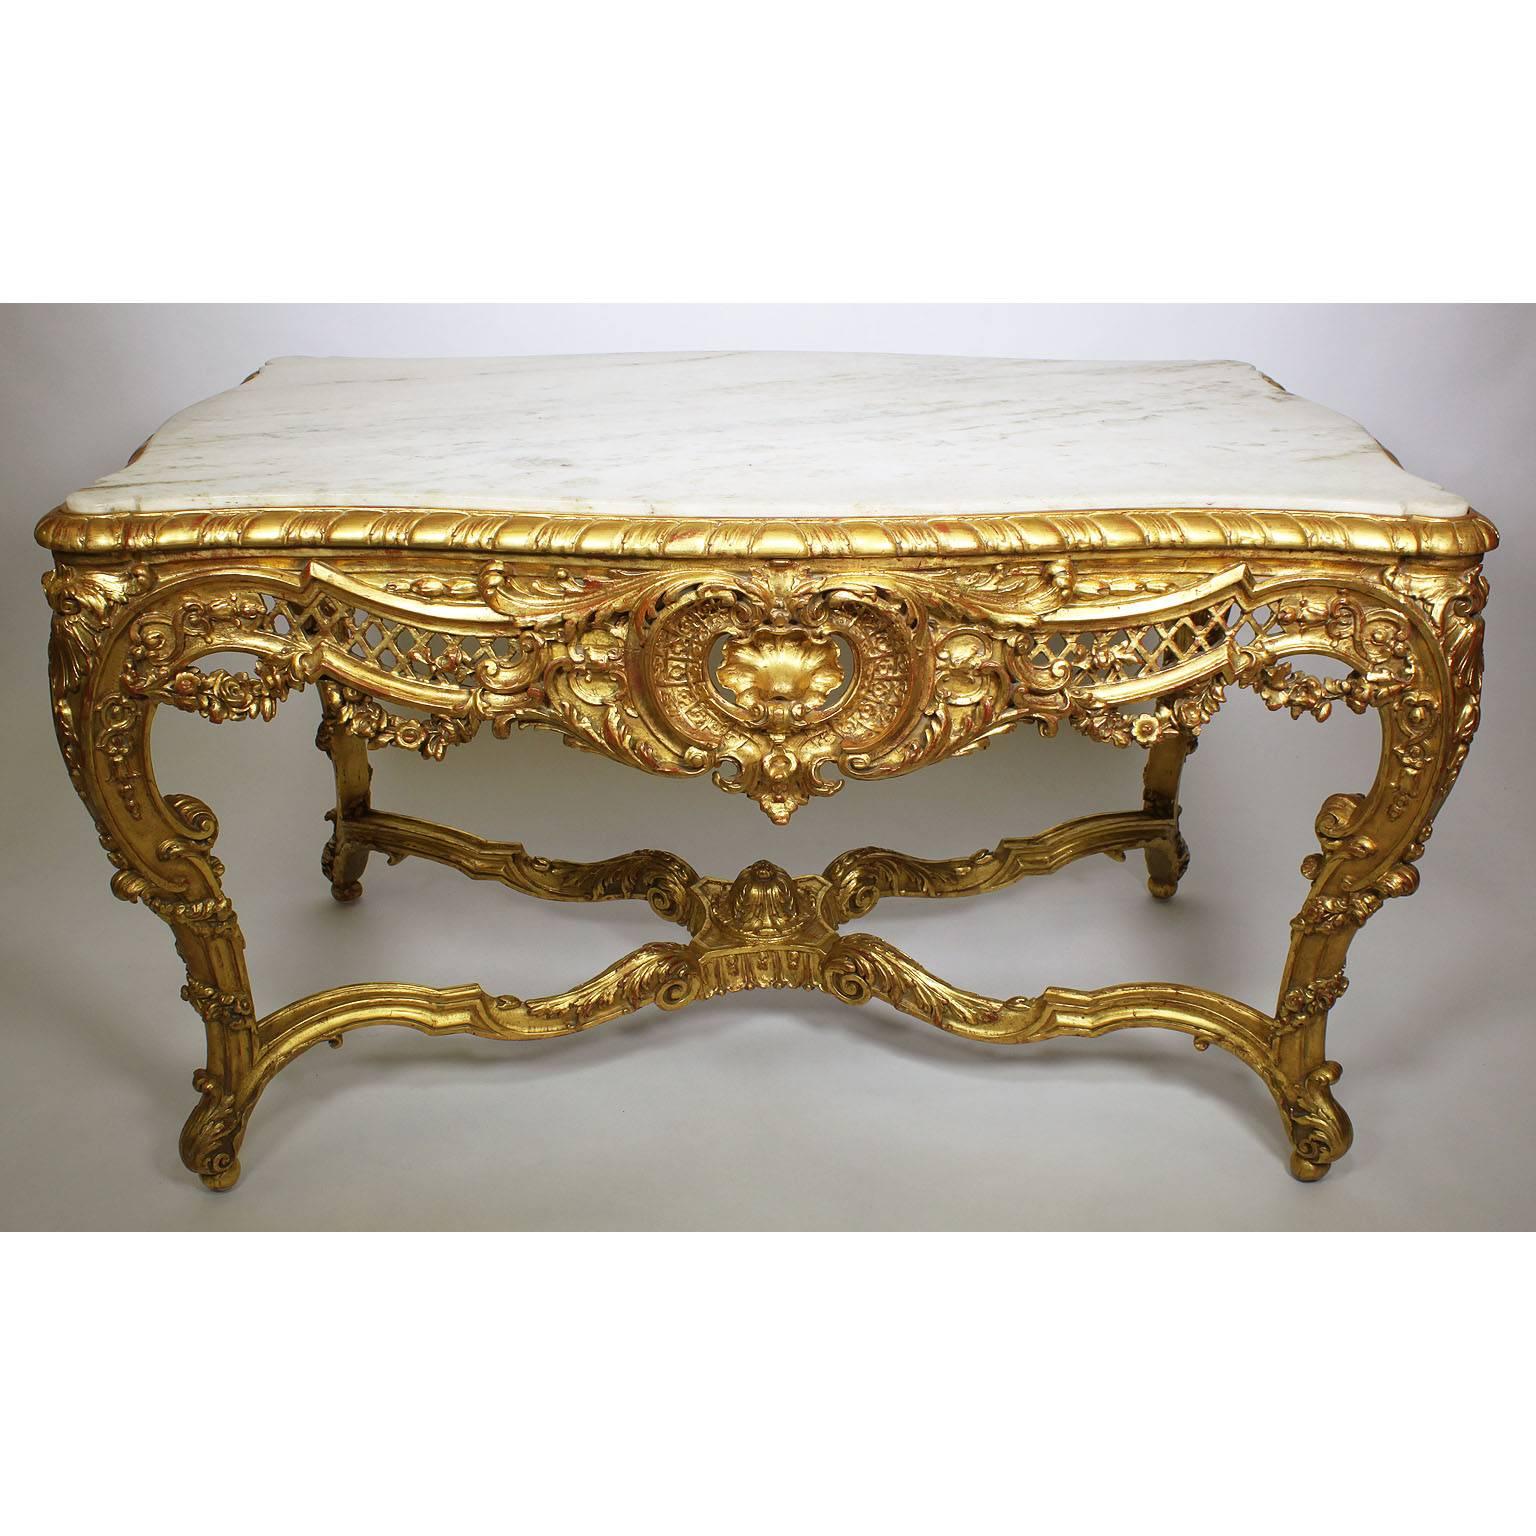 A fine French Belle Époque 19th-20th century giltwood carved Rococo Louis XV style center hall table. The rectangular frame with serpentine front and sides with four cabriolet legs connected with an 